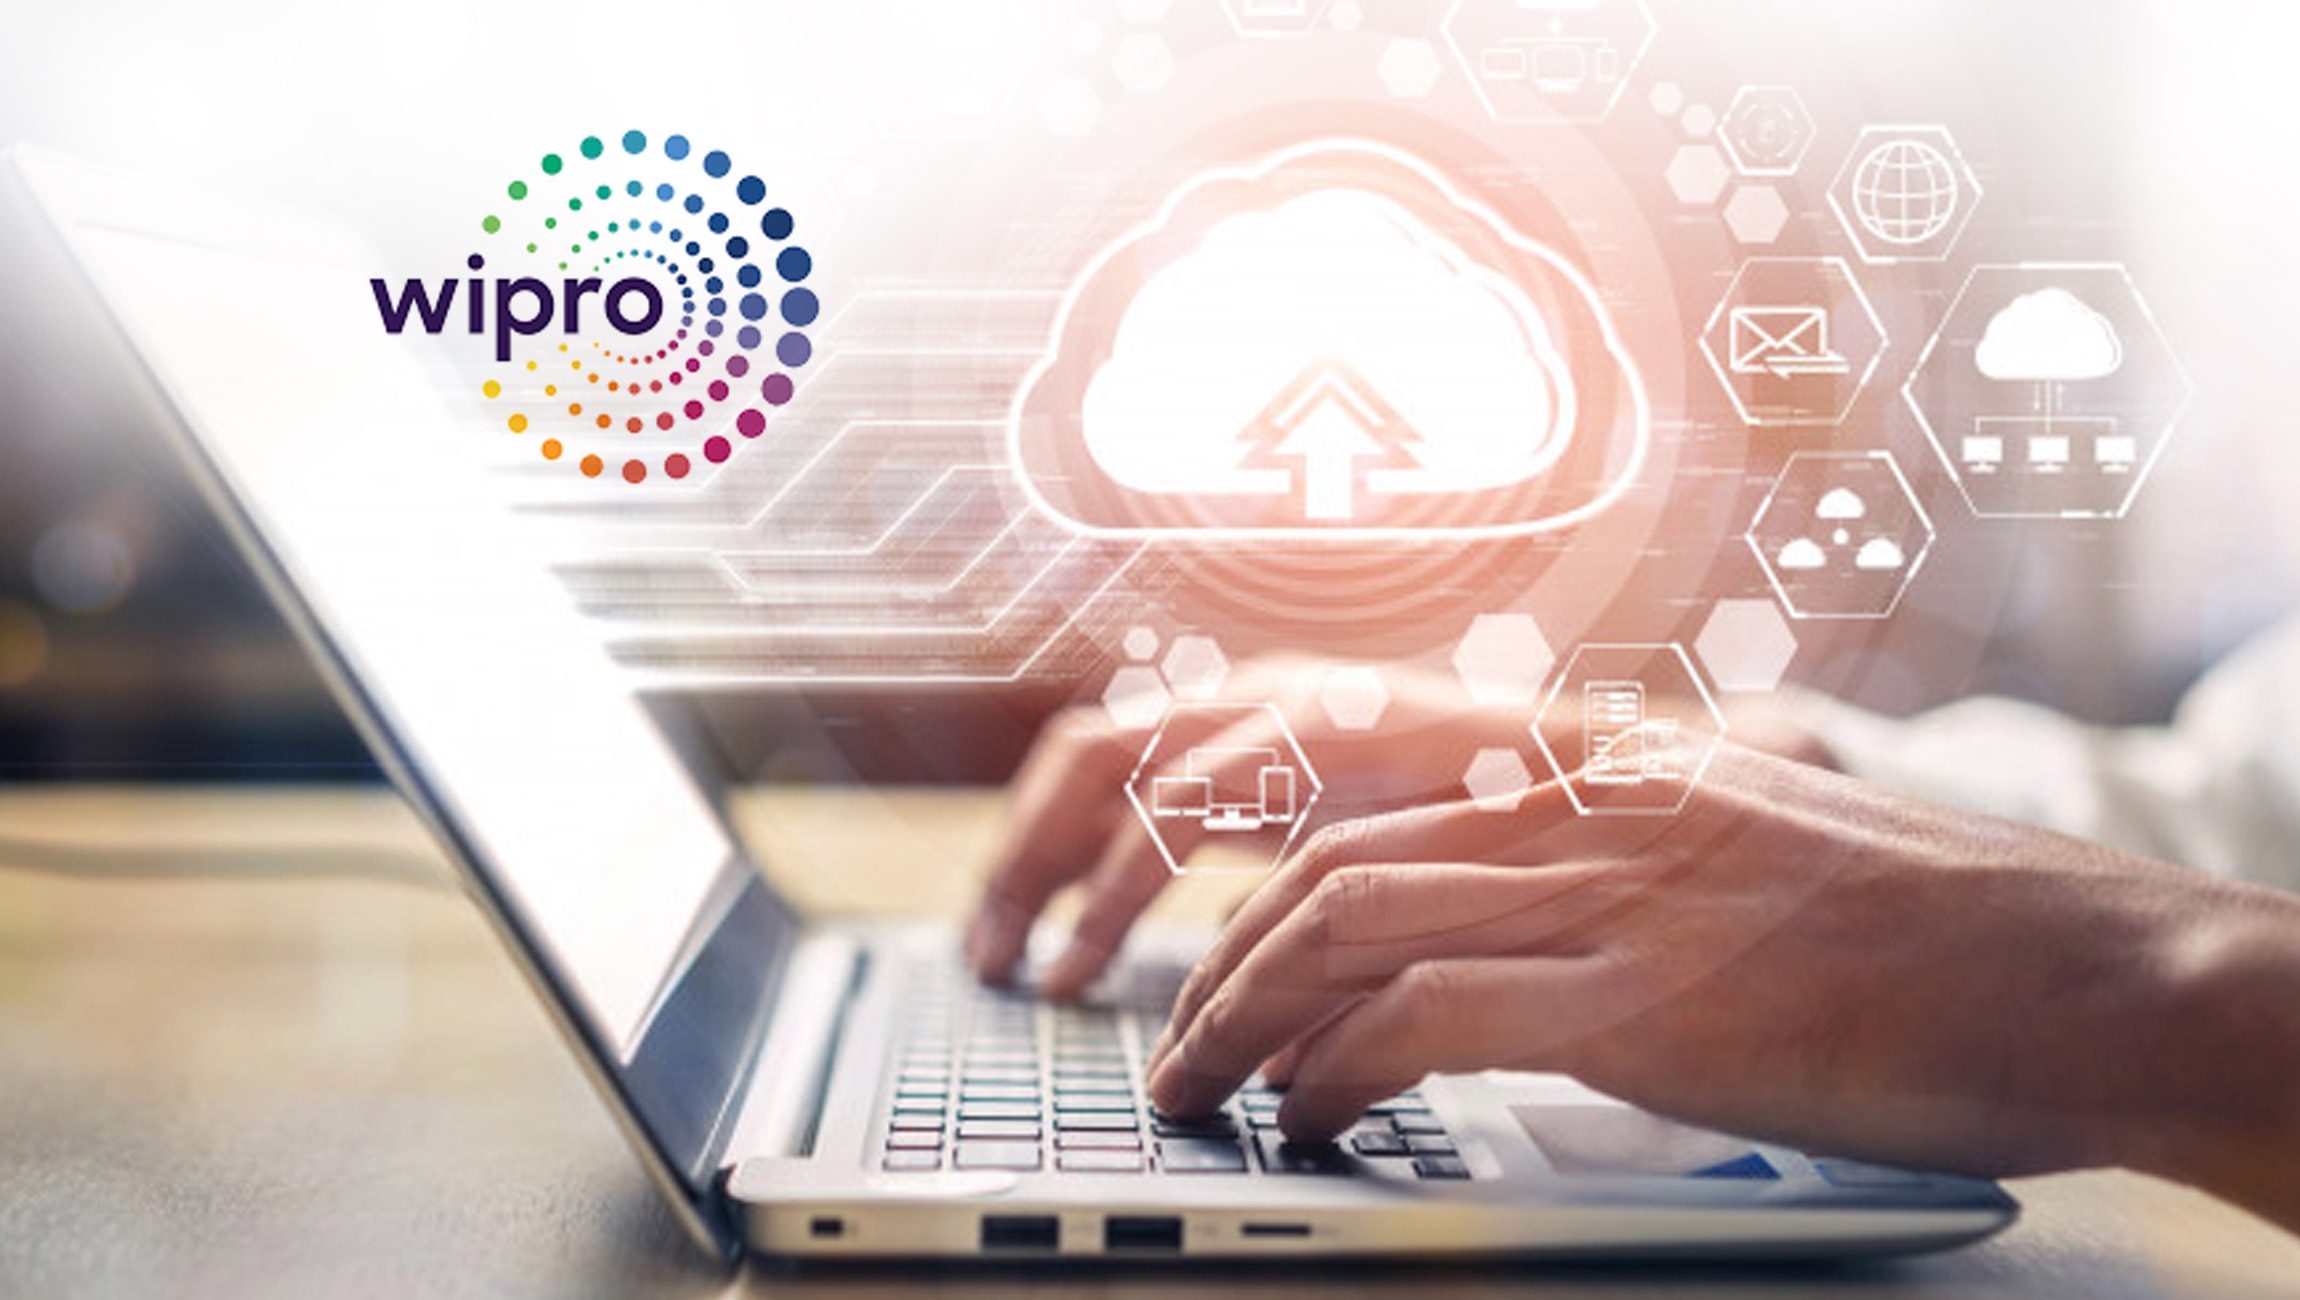 Wipro Unveils a New “Cloud Car” Platform; Aims to Accelerate the Deployment of Software-Defined Vehicles